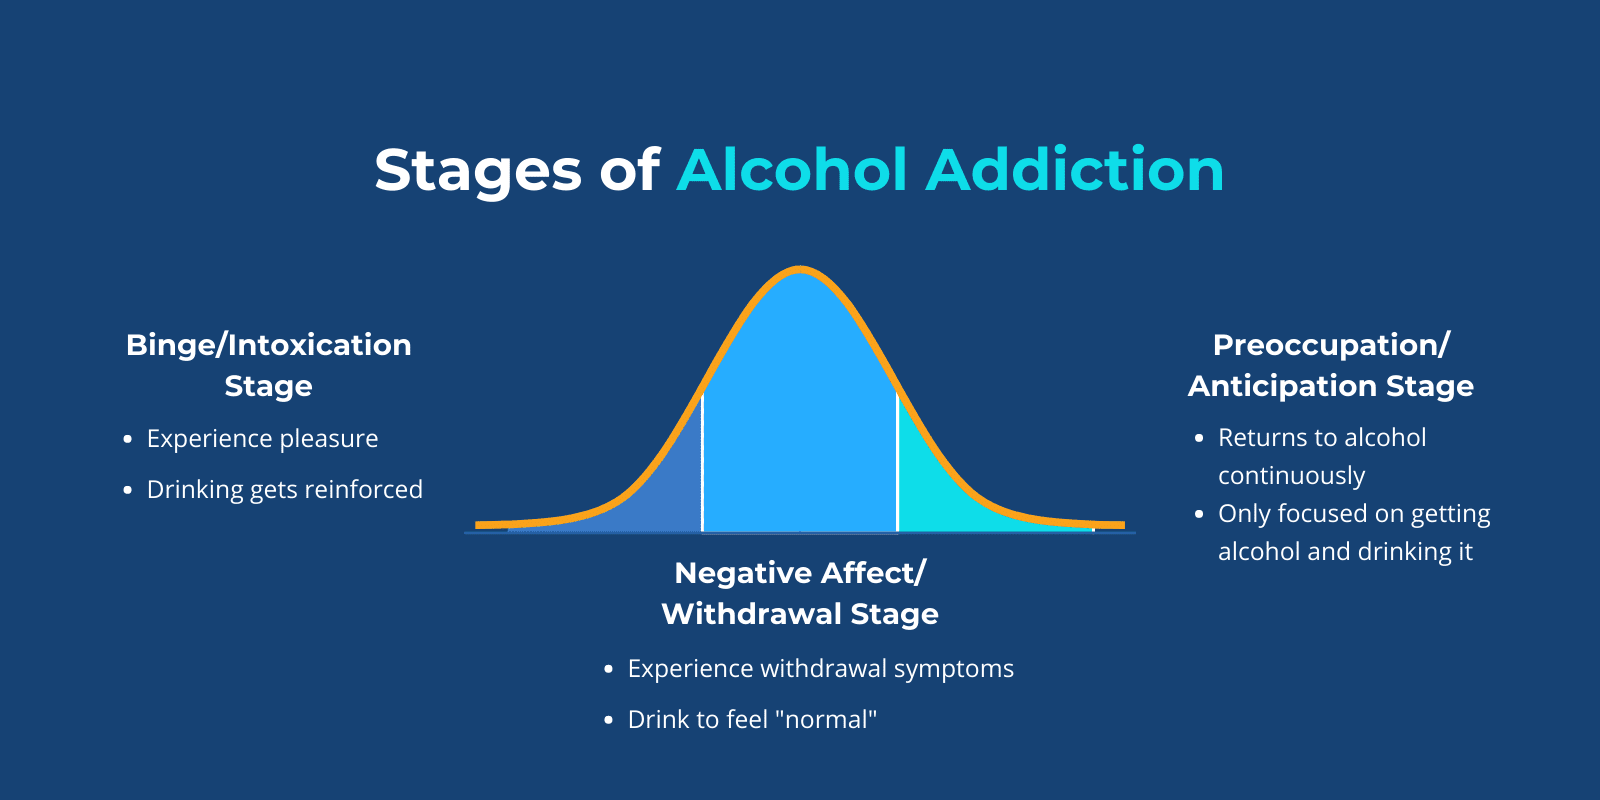 Normal bell curve to express different stages of alcohol addiction from binge/intoxication, negative affect/withdrawal stage, and preoccupation/anticipation stage